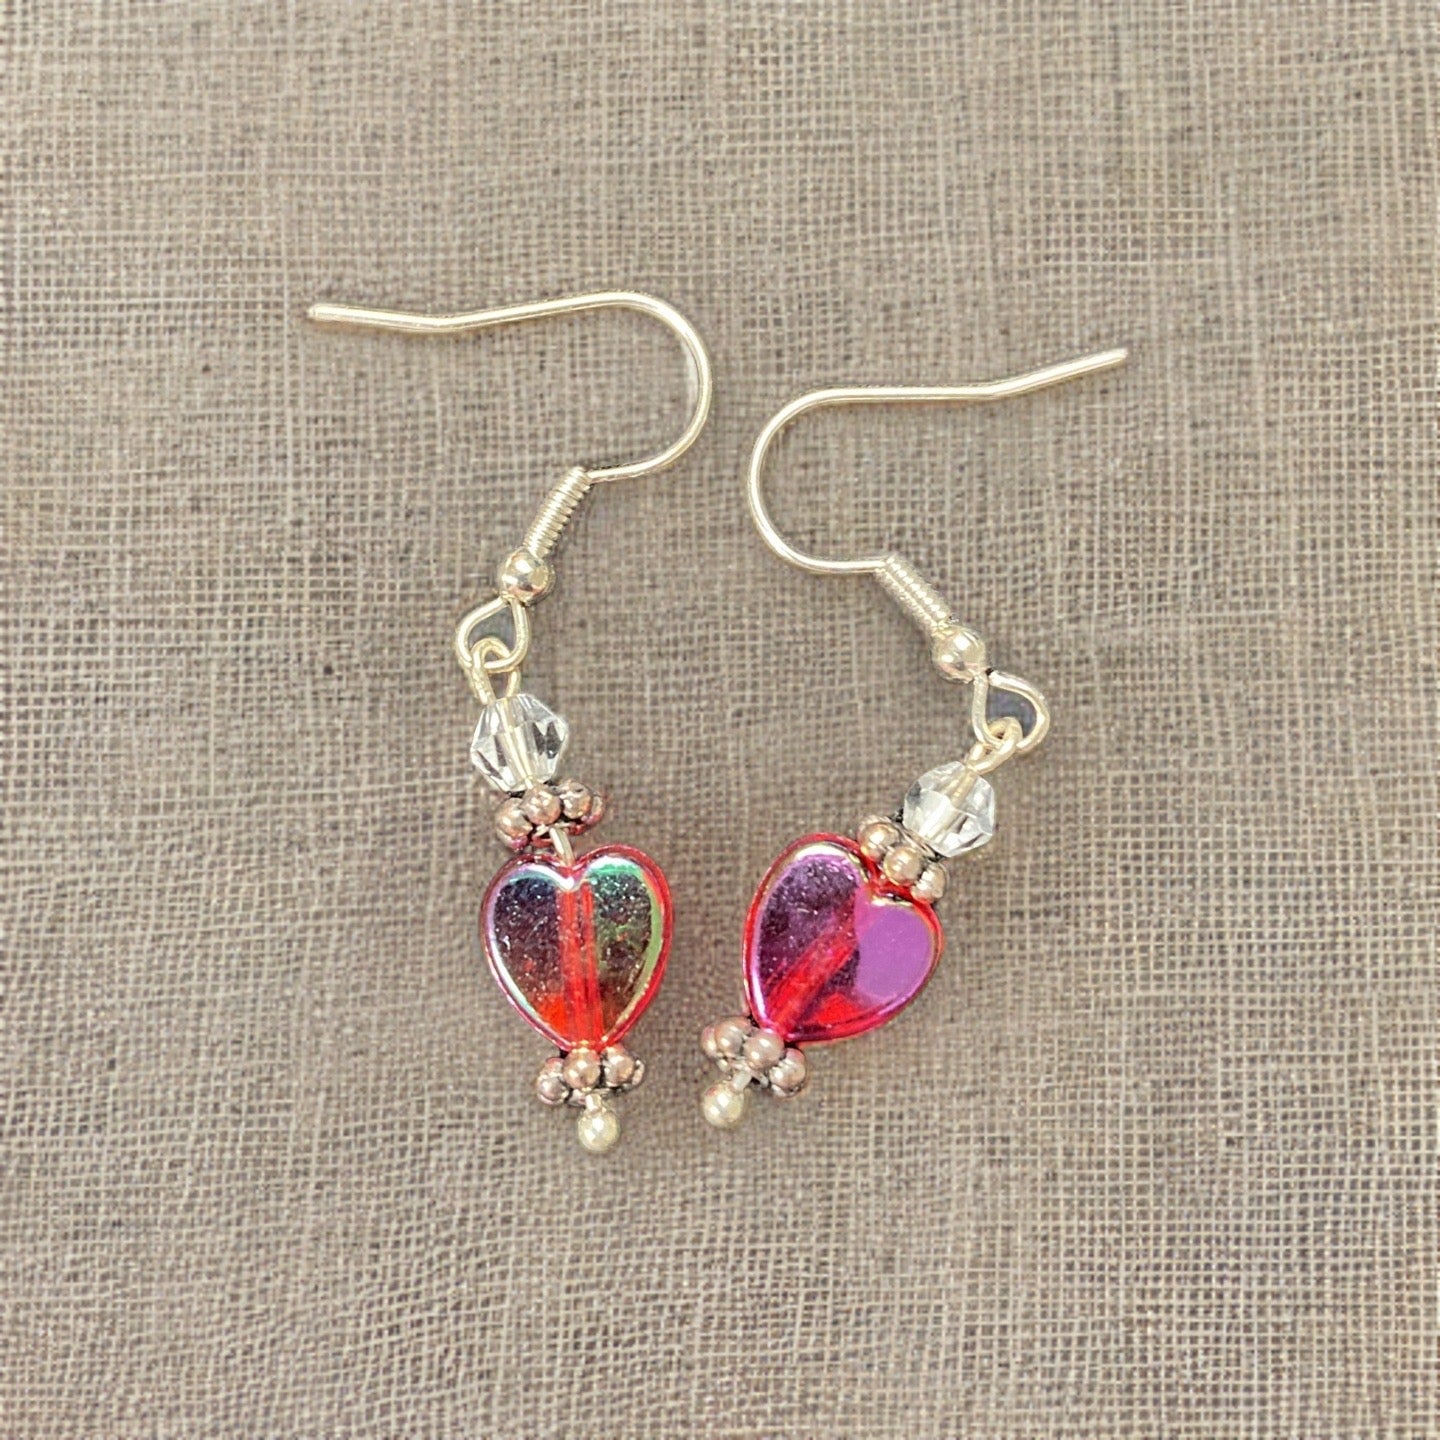 Handmade Earrings with Unique Hypoallergenic Charms - SBJ